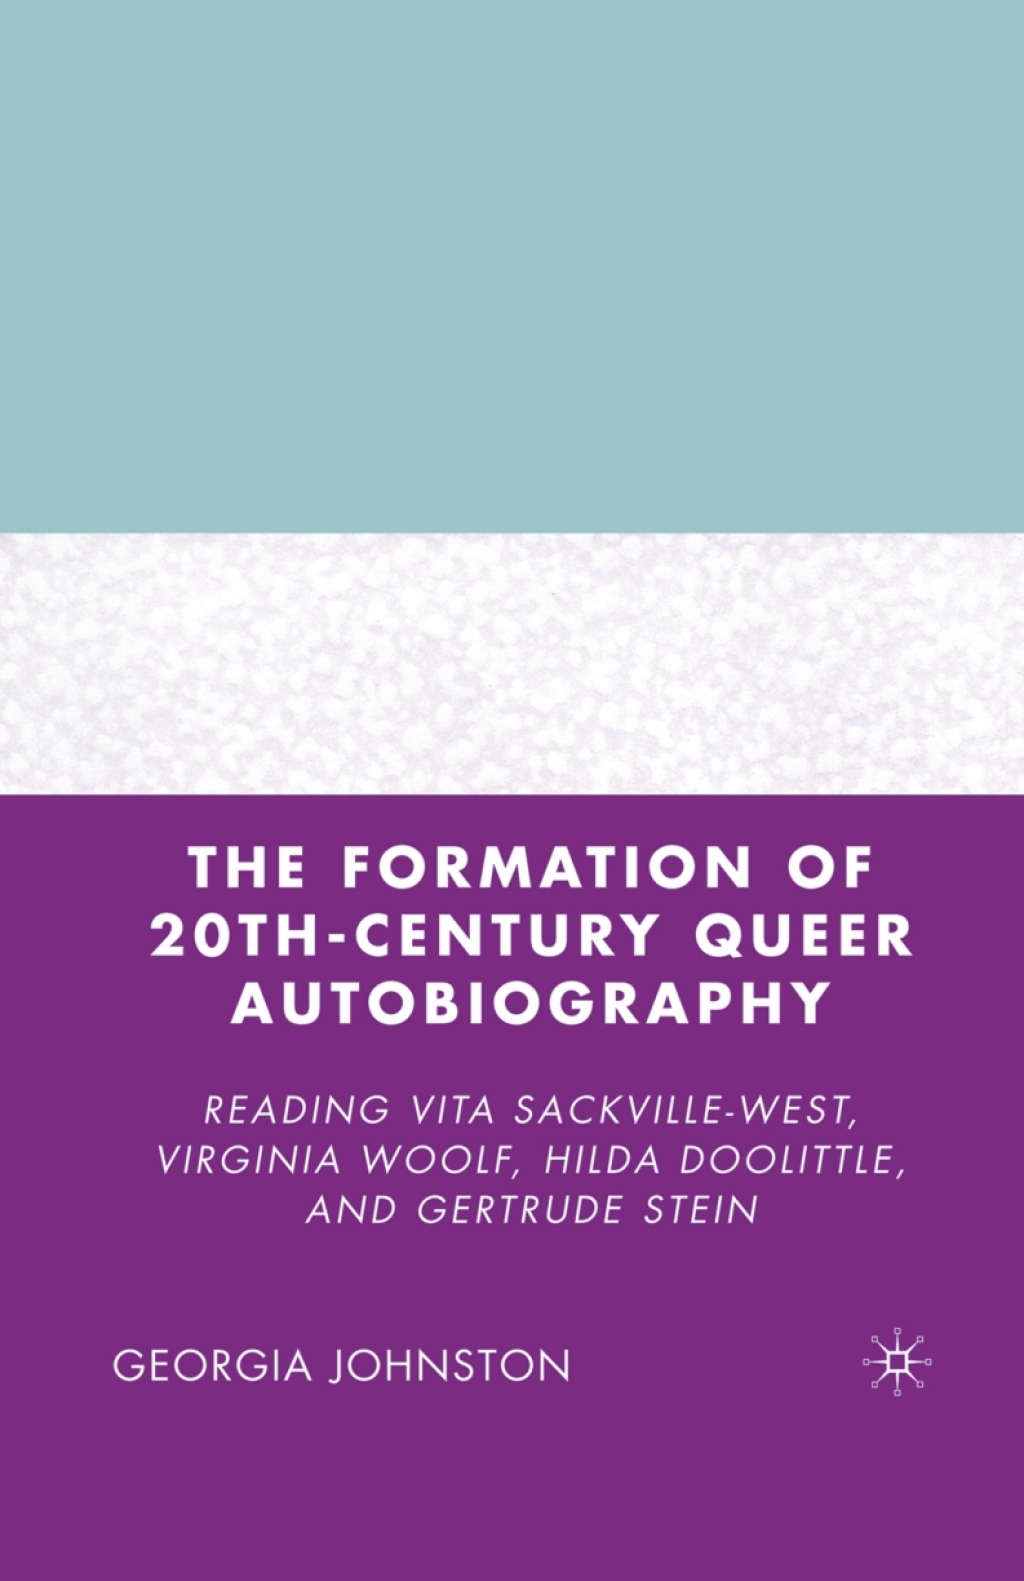 The Formation of 20th-Century Queer Autobiography (eBook Rental) - G. Johnston,